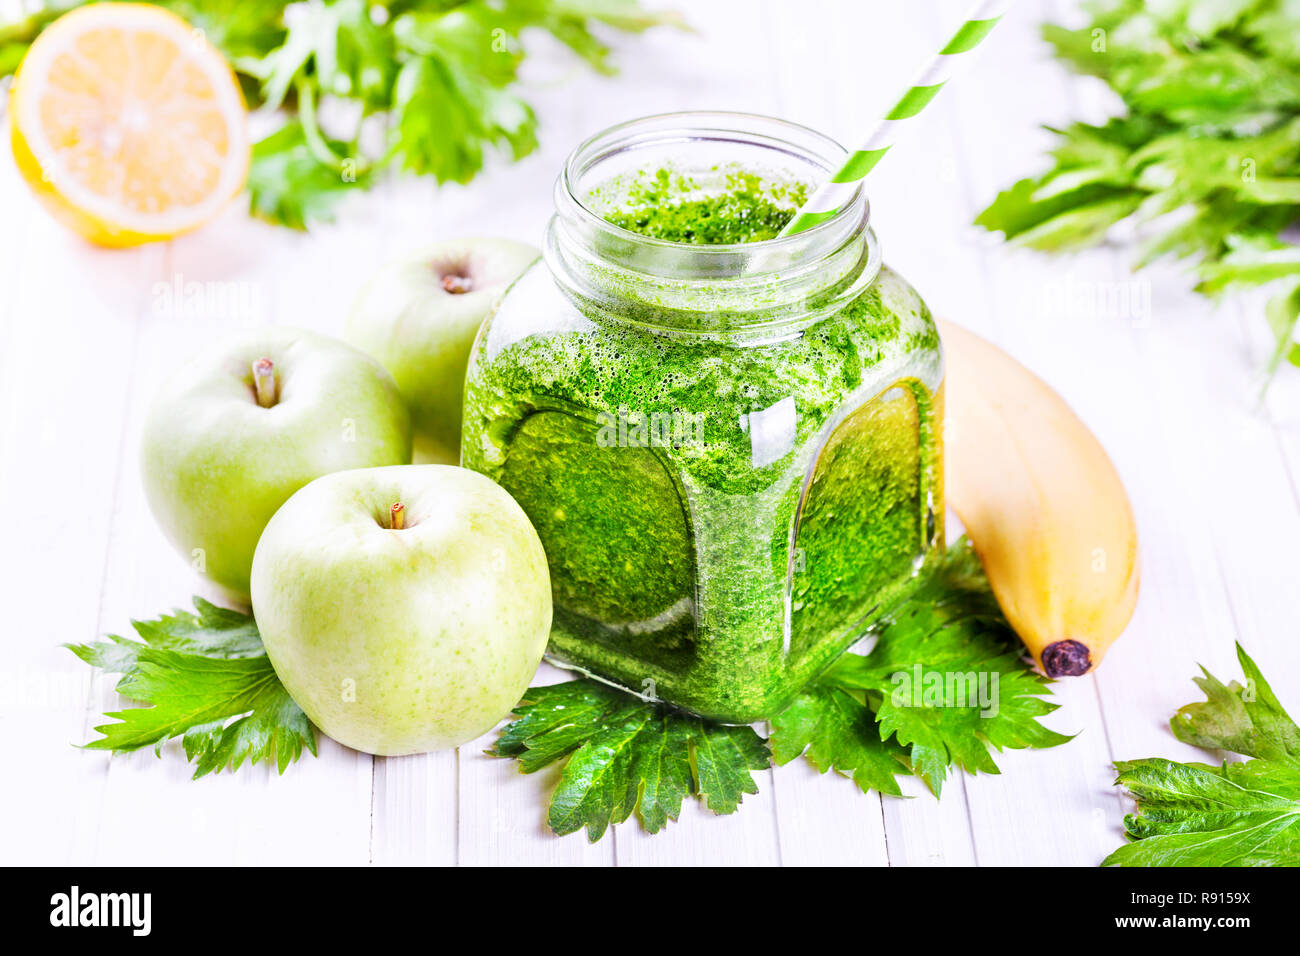 Fresh green smoothie with banana, apples, celery and lemon on white table Stock Photo